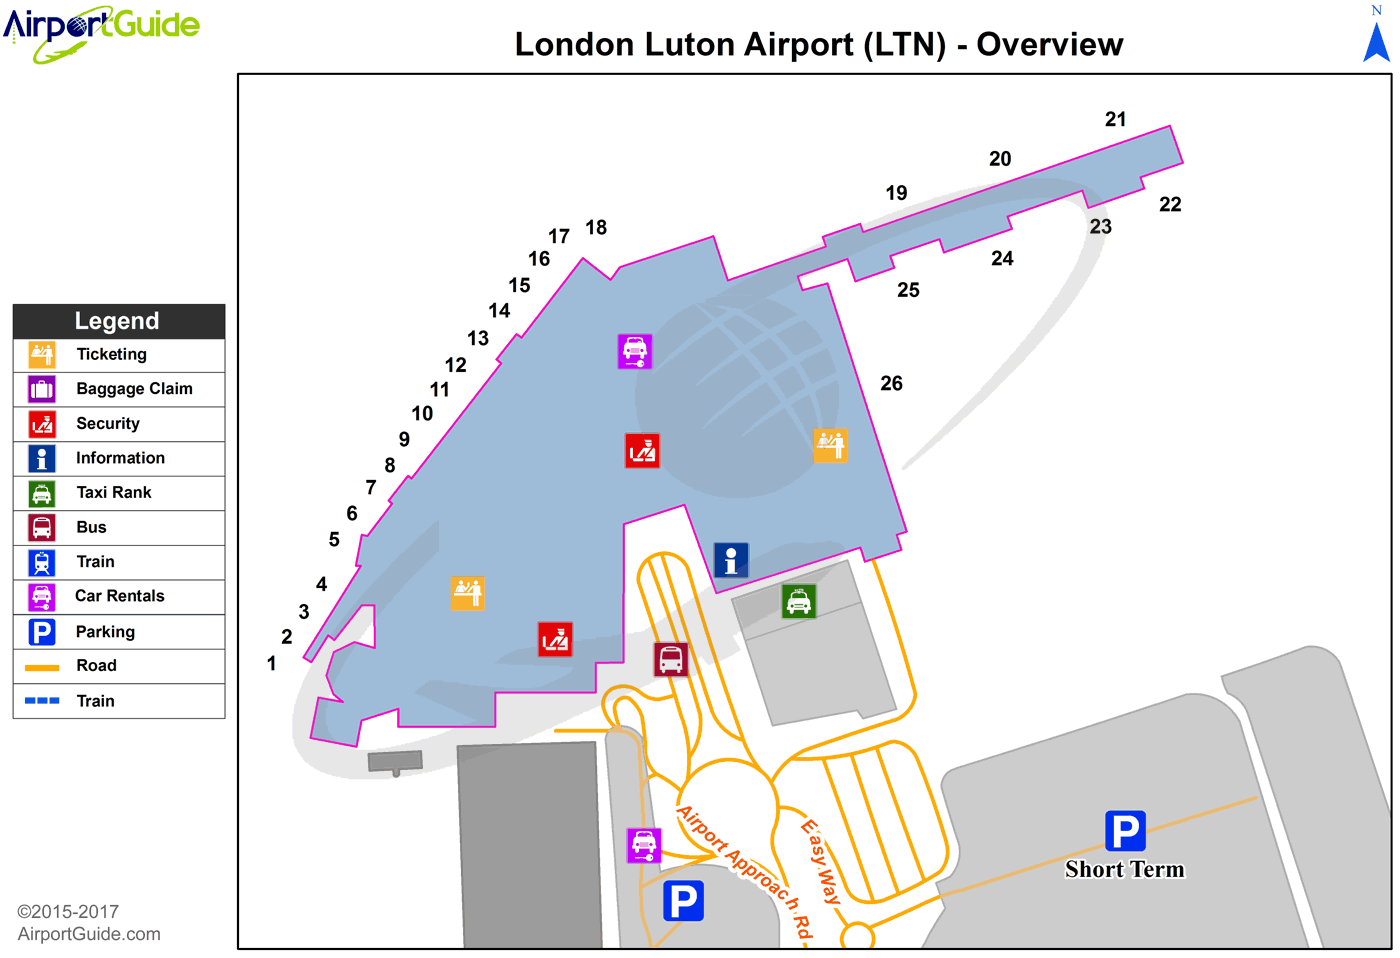 London - Bicester Airfield (LTN) Airport Terminal Map - Overview